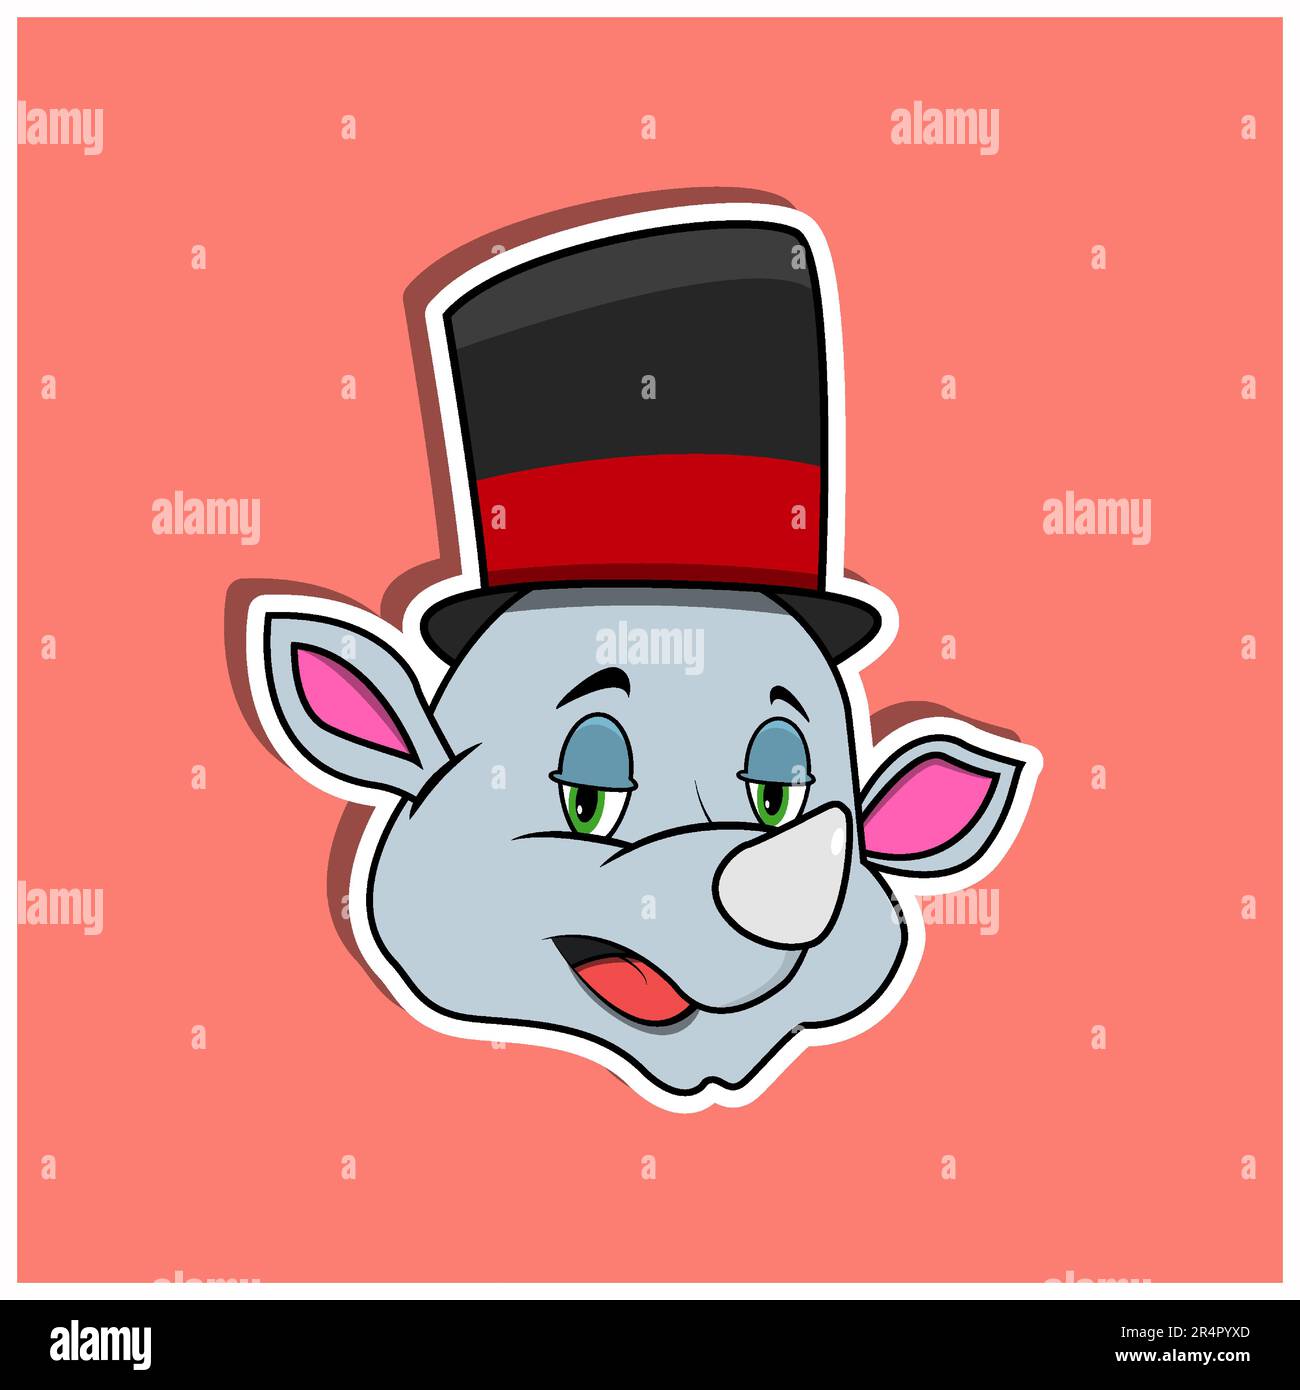 Animal Face Sticker With Rhinoceros Wearing Circus Hat. Character Design. Vector and Illustration Stock Vector